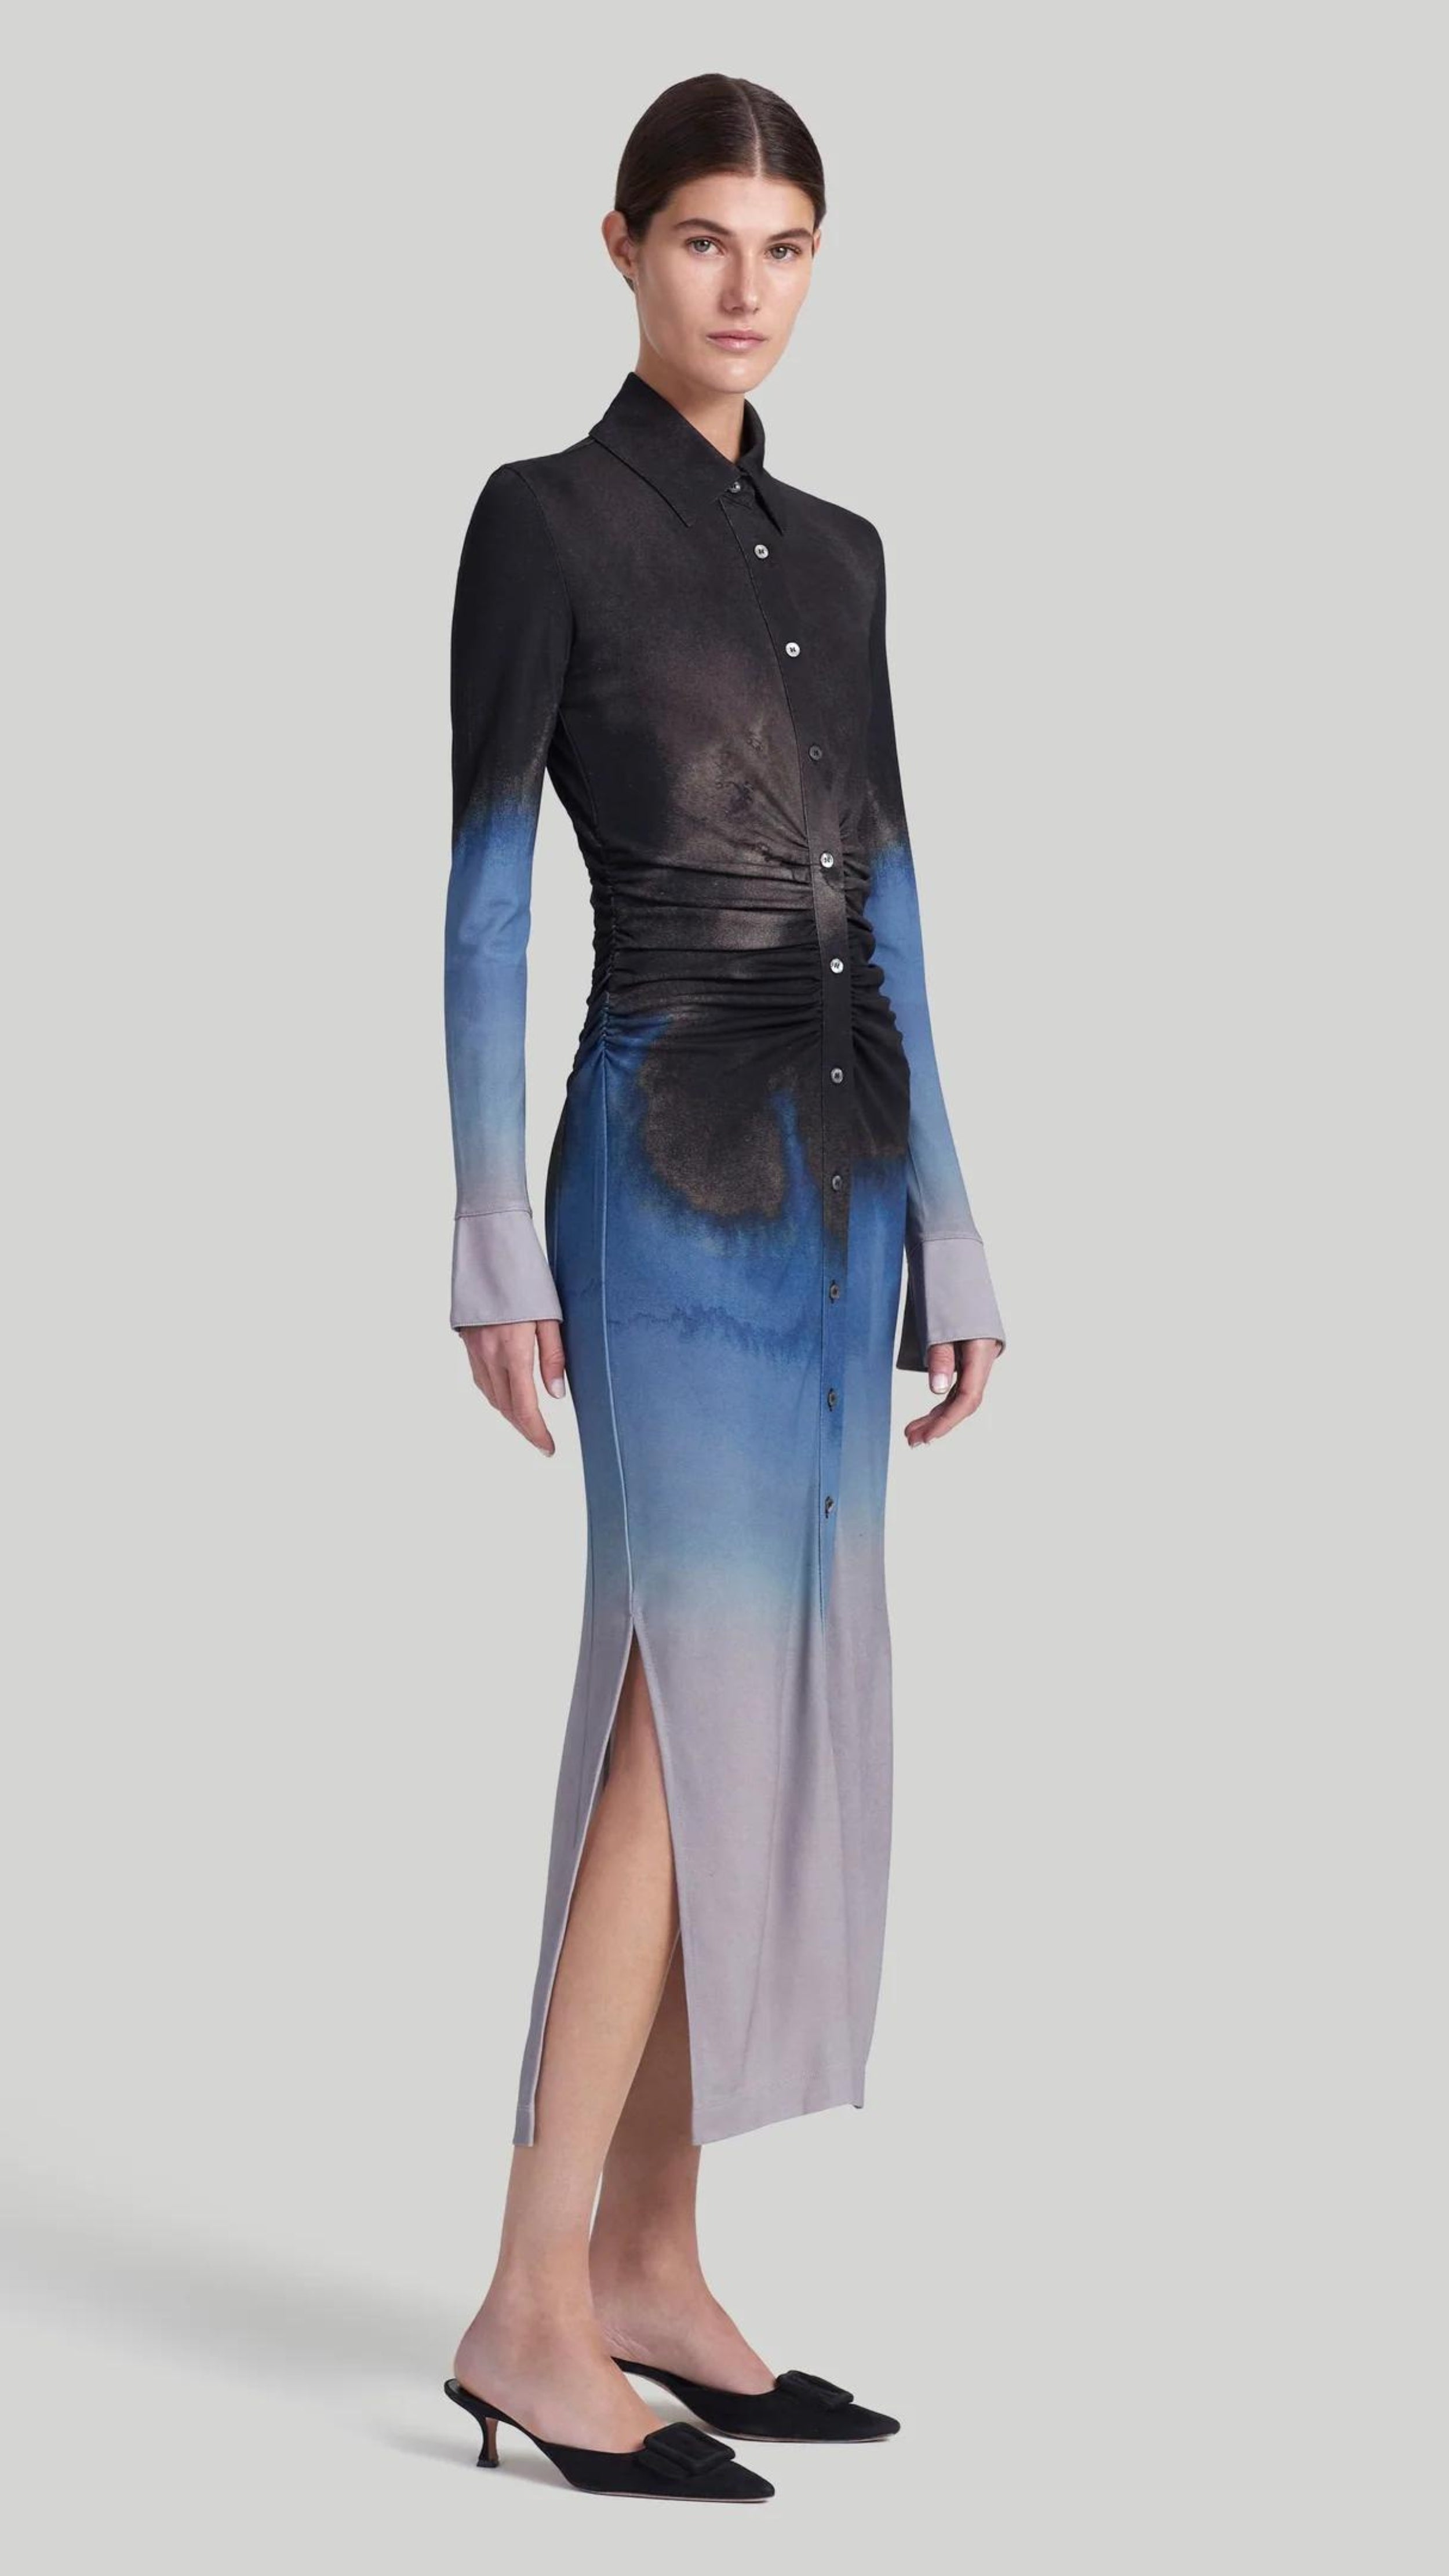 Altuzarra Claudia Dress in Eventide Made from jersey fabric, it is a slim-fitting midi dress featuring ruched detail at the waist, shirt dress buttons up the front, and side slits at the hem. The color is an ombre of deep grey, blue, and pale grey. Shown on model facing front side.